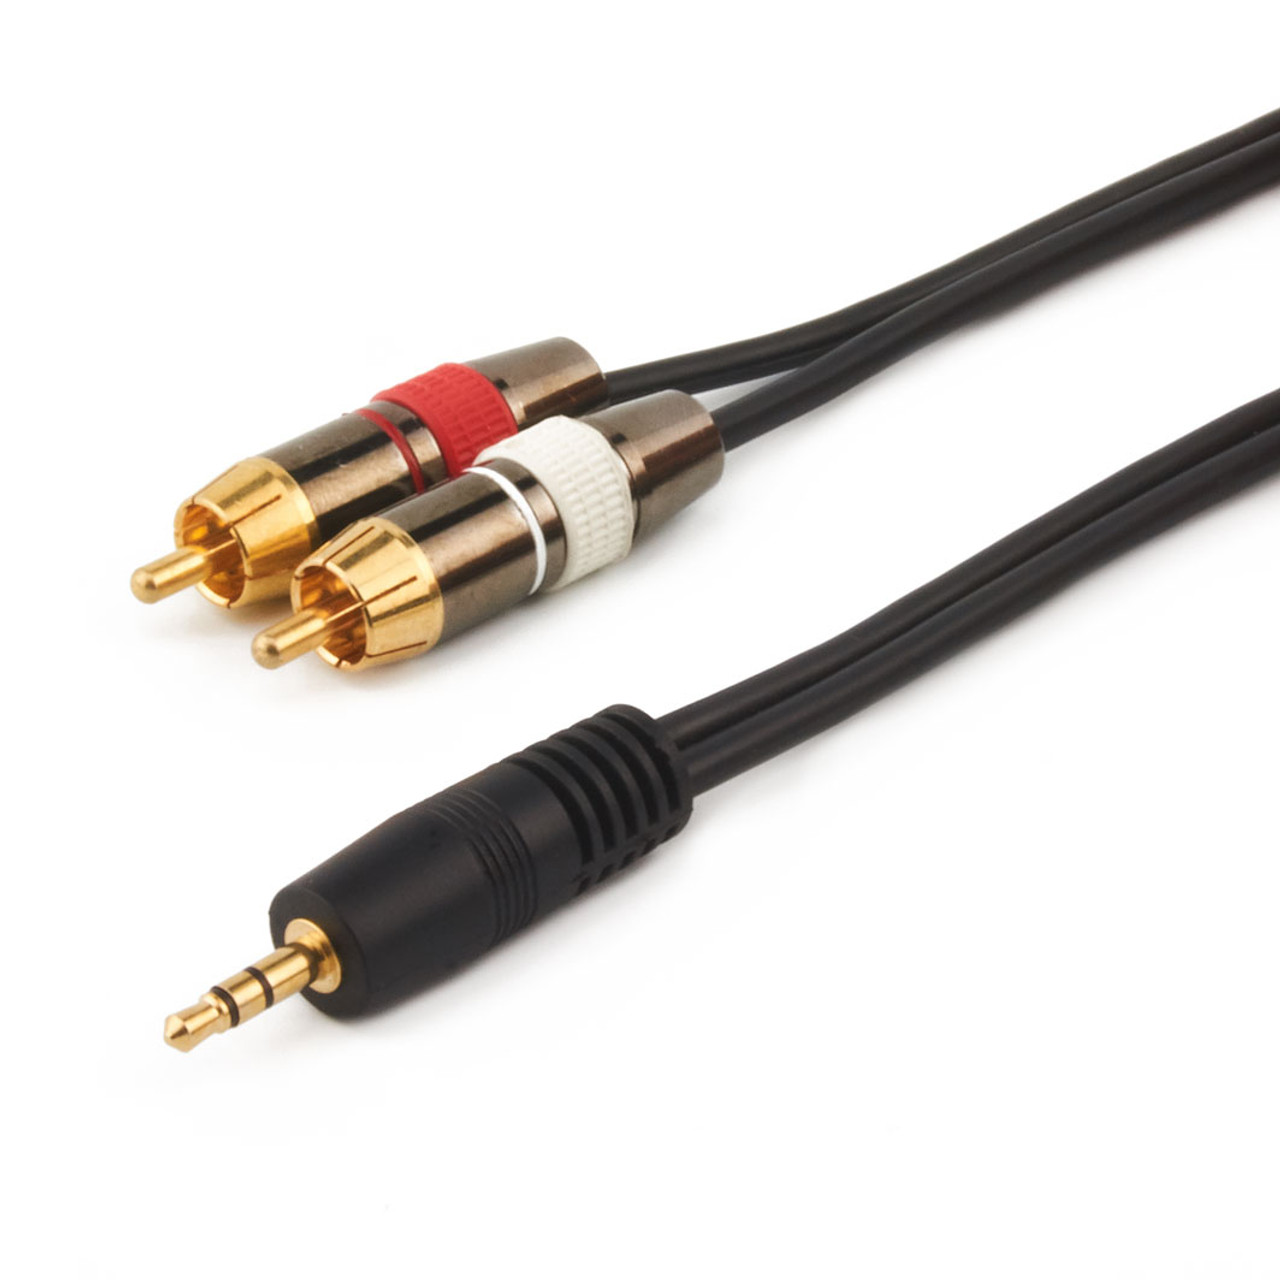 3.5mm Premium Mini-Stereo TRS Male to 2RCA Male Cable